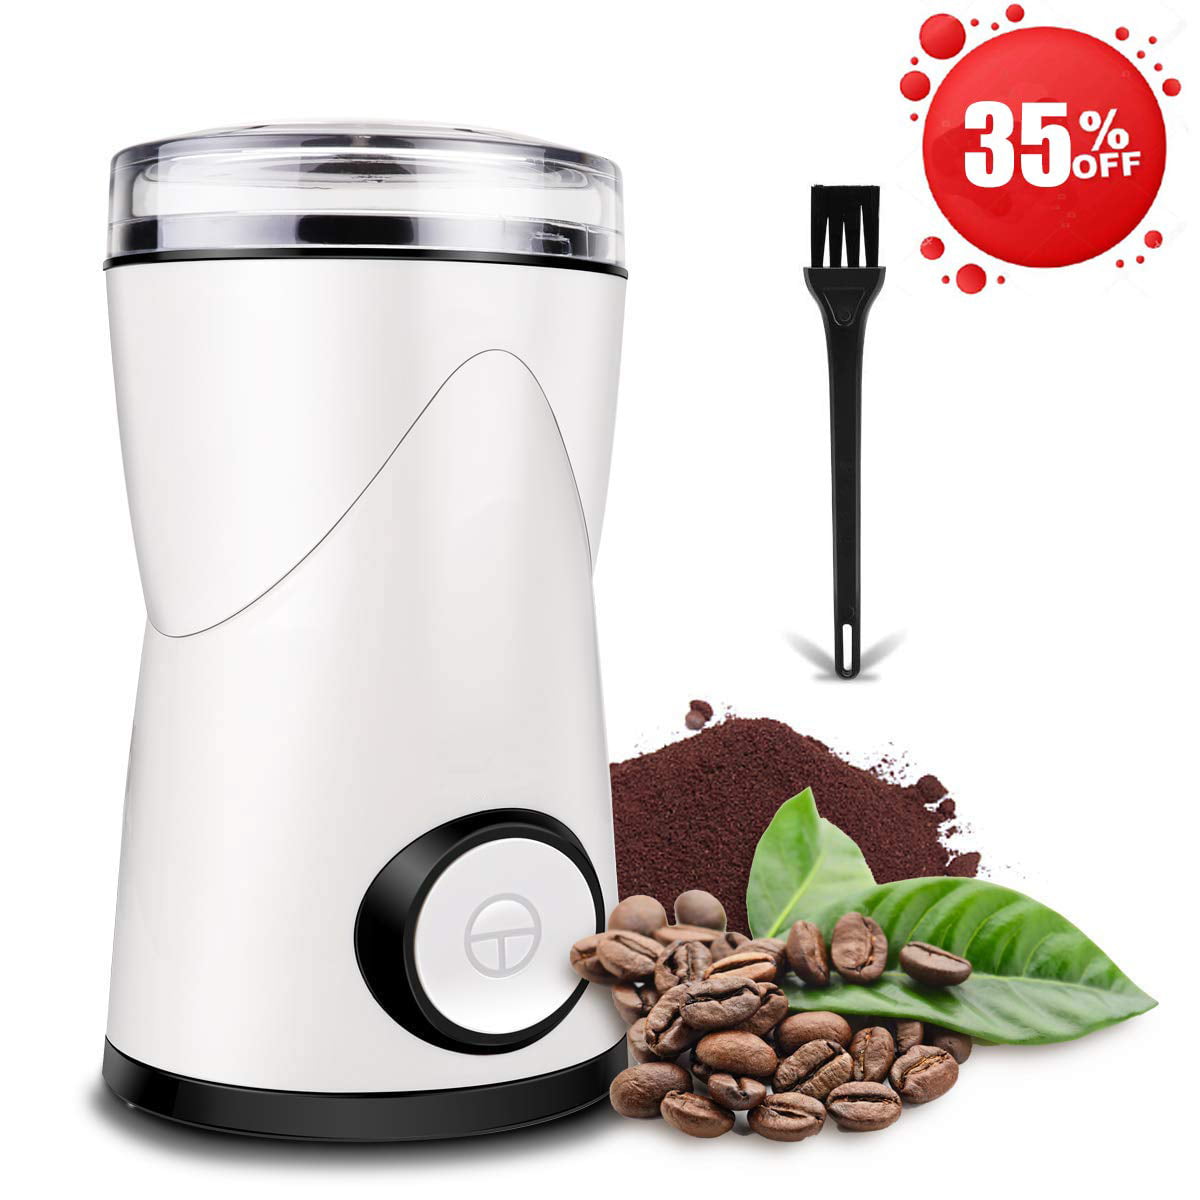 Seed Electric Coffee Bean Grinder Stainless Steel Blade Seasoning Coffee Grinder with Powerful Motor for Spices Pepper Nuts Herbs